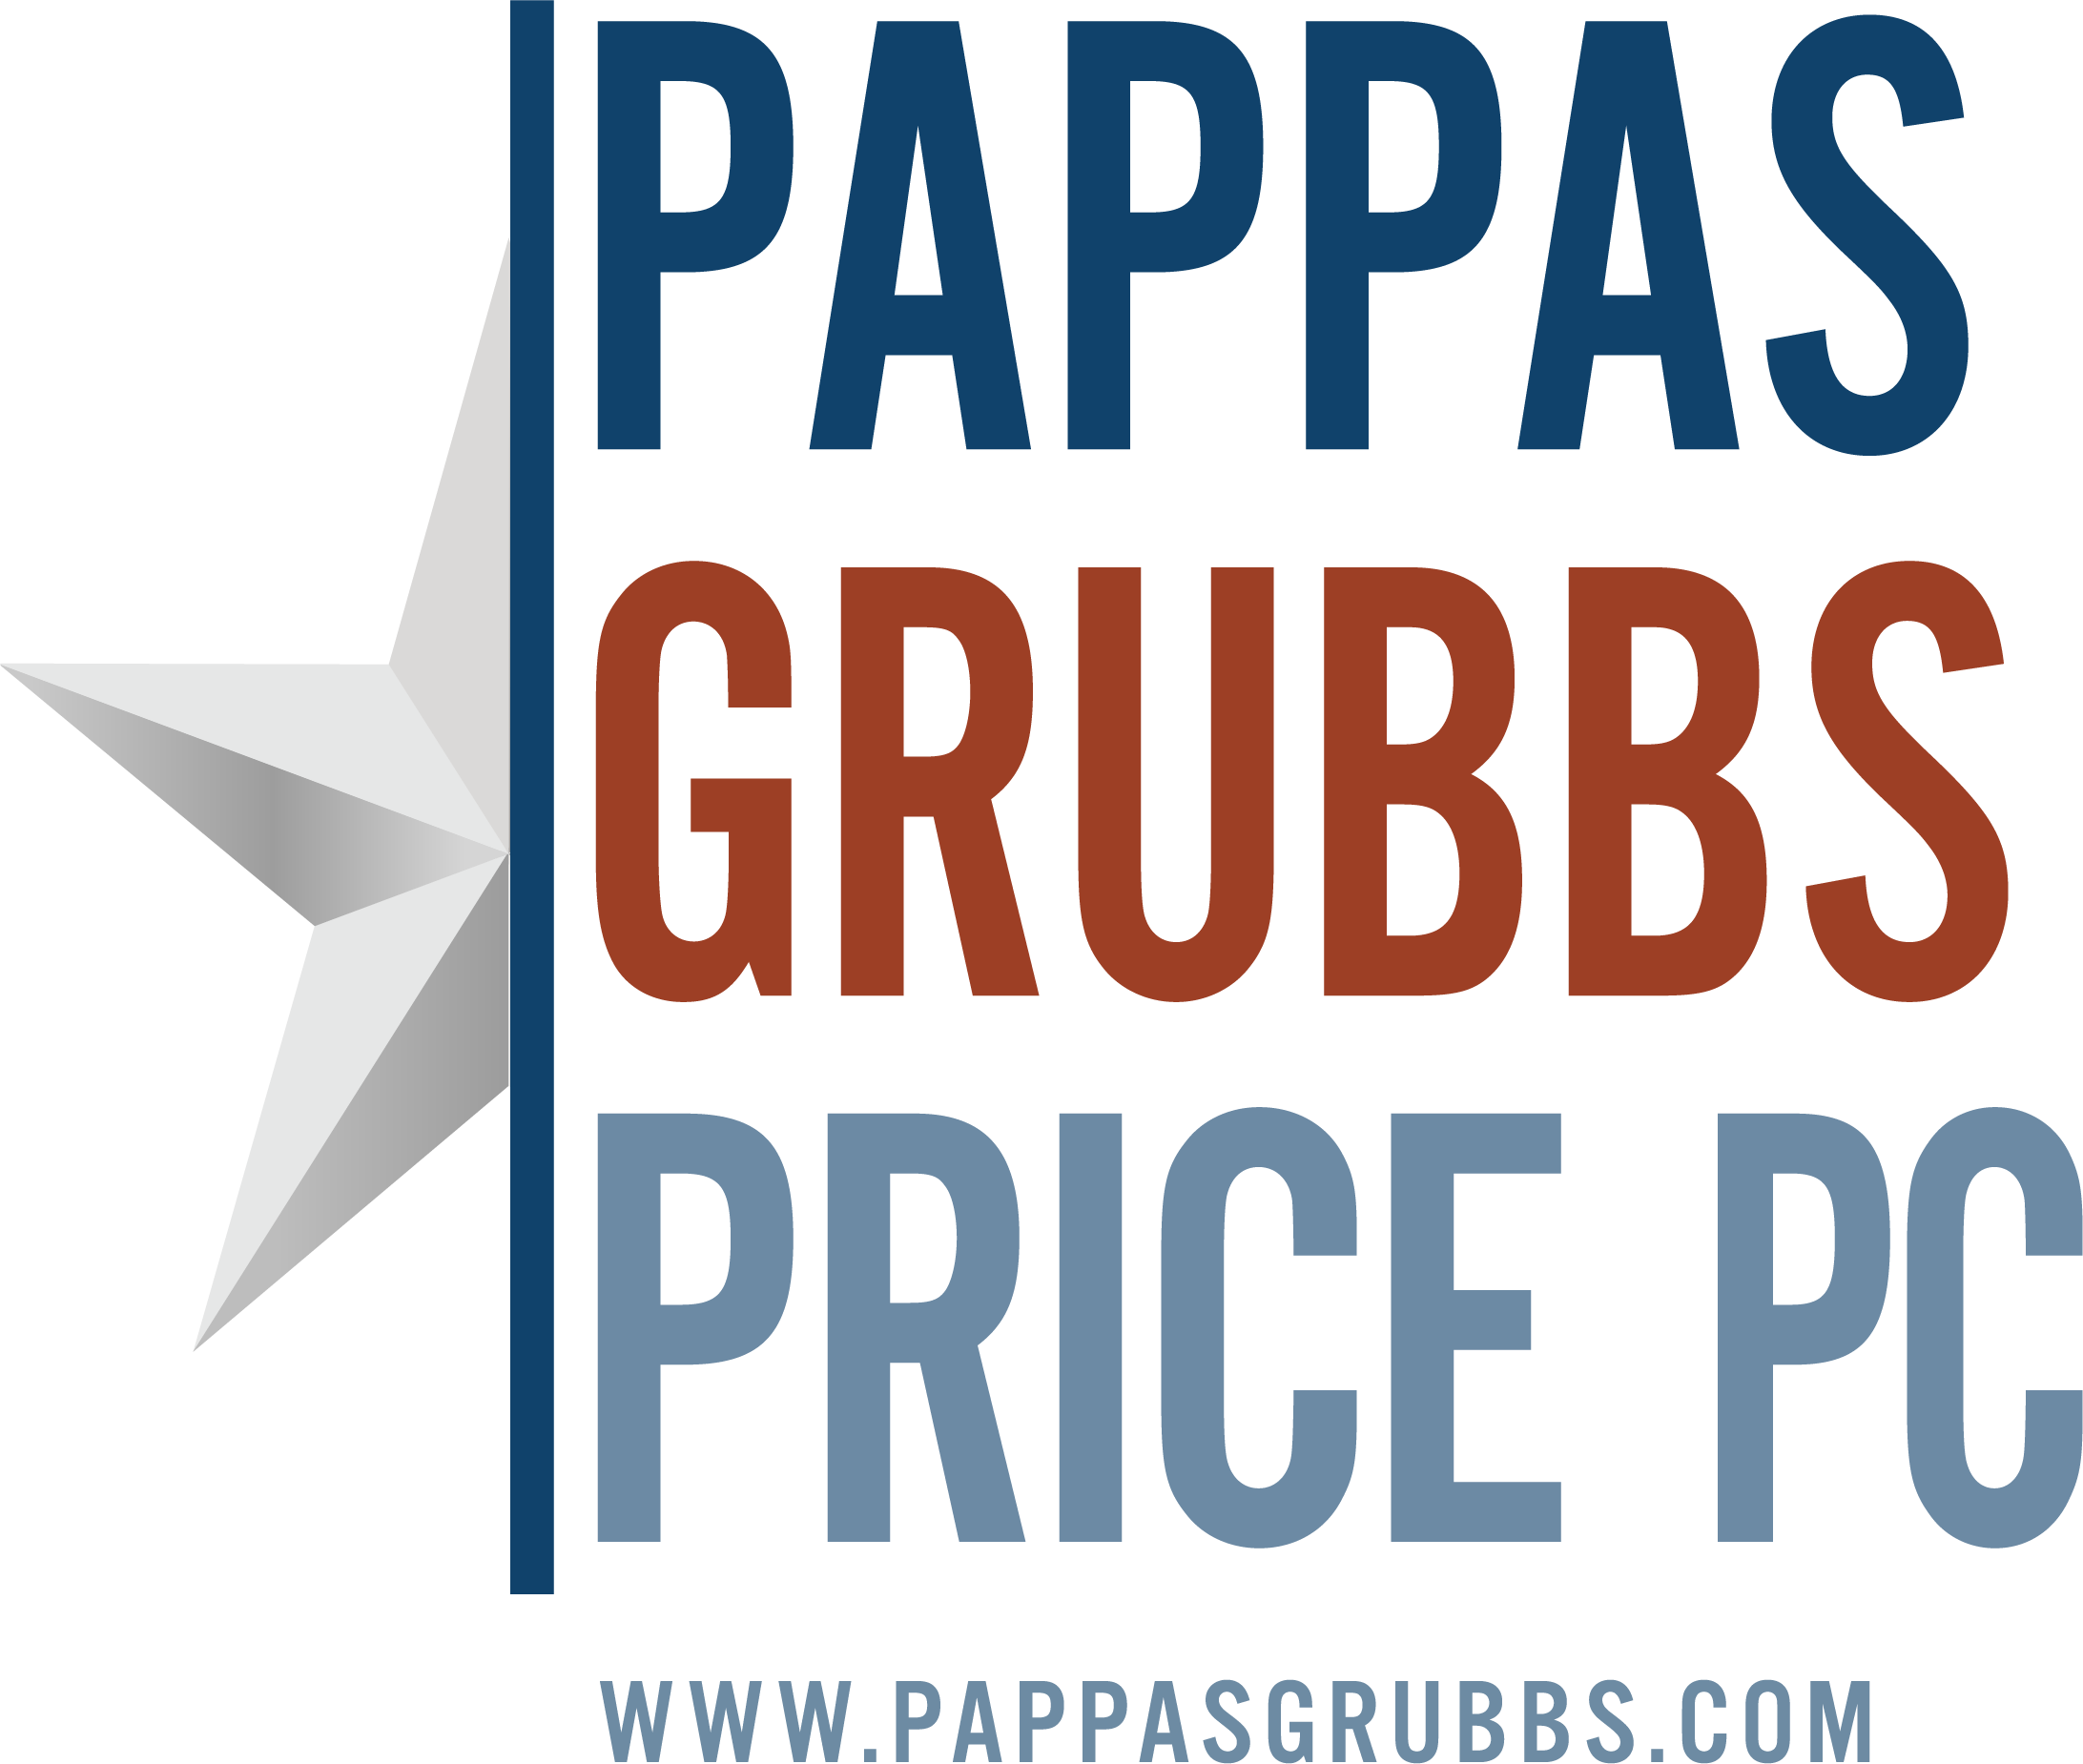 Pappas Grubbs Price PC is pleased to introduce our newest Shareholders.